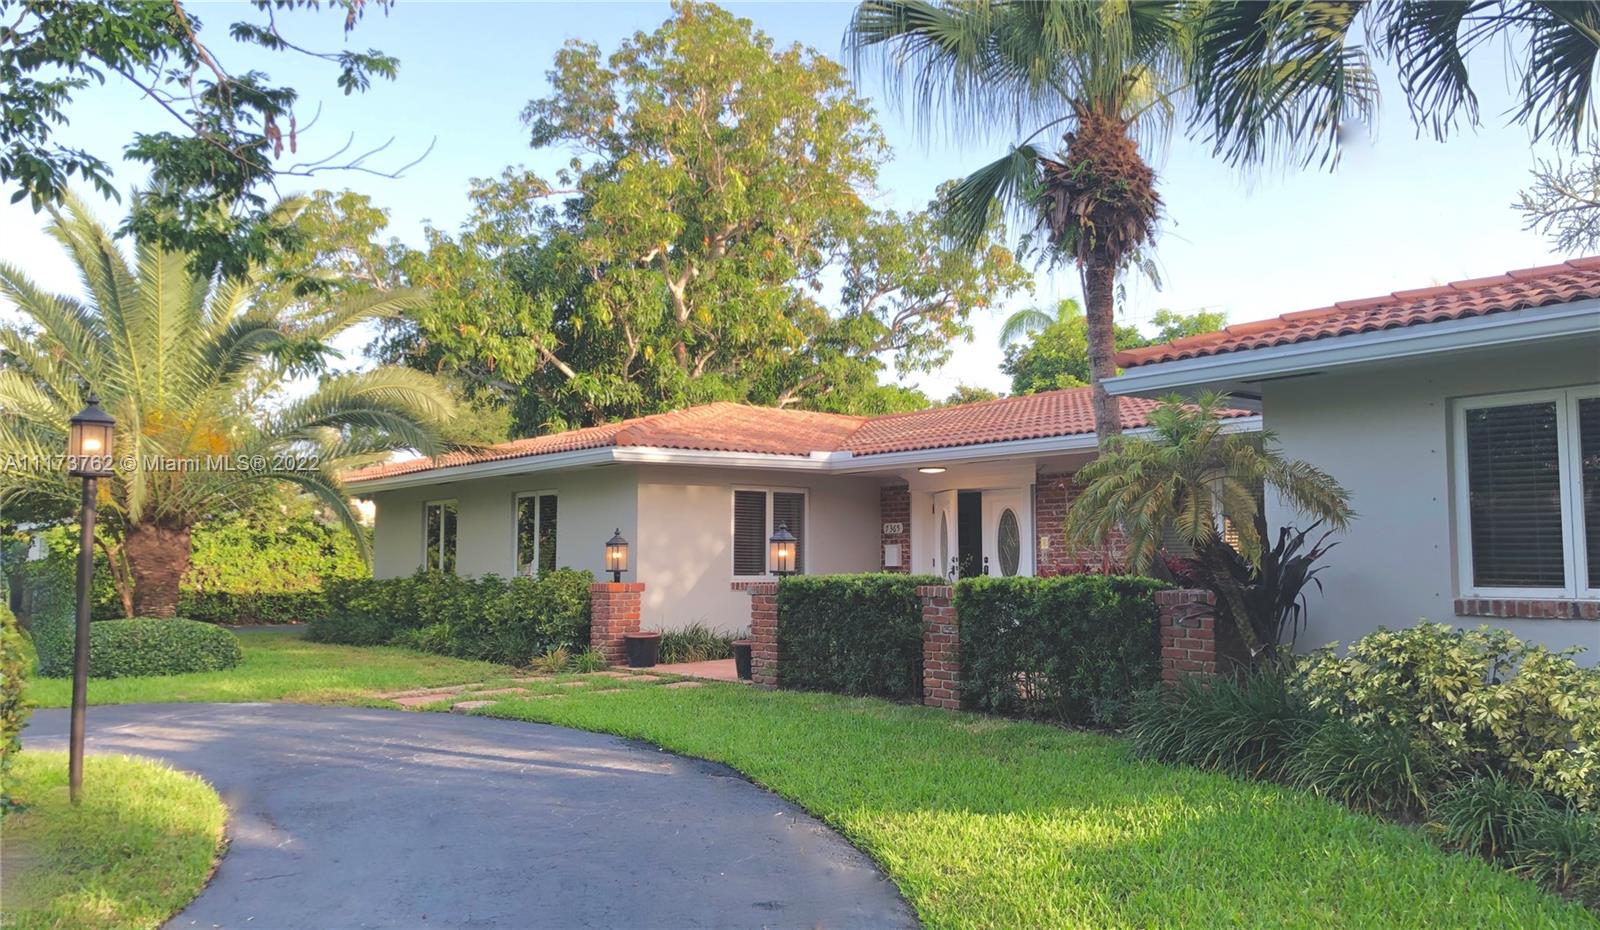 Bright, spacious and beautifully updated family home in sought after Pinecrest neighborhood within a short walk to top rated Palmetto schools. On a quiet street this beautiful home features quality updates throughout. French doors all around overlook oversized pool and private patio great for family and entertaining with built in bbq and wet bar. Stable and local landlord looking for longterm tenant. No smokers, no students.